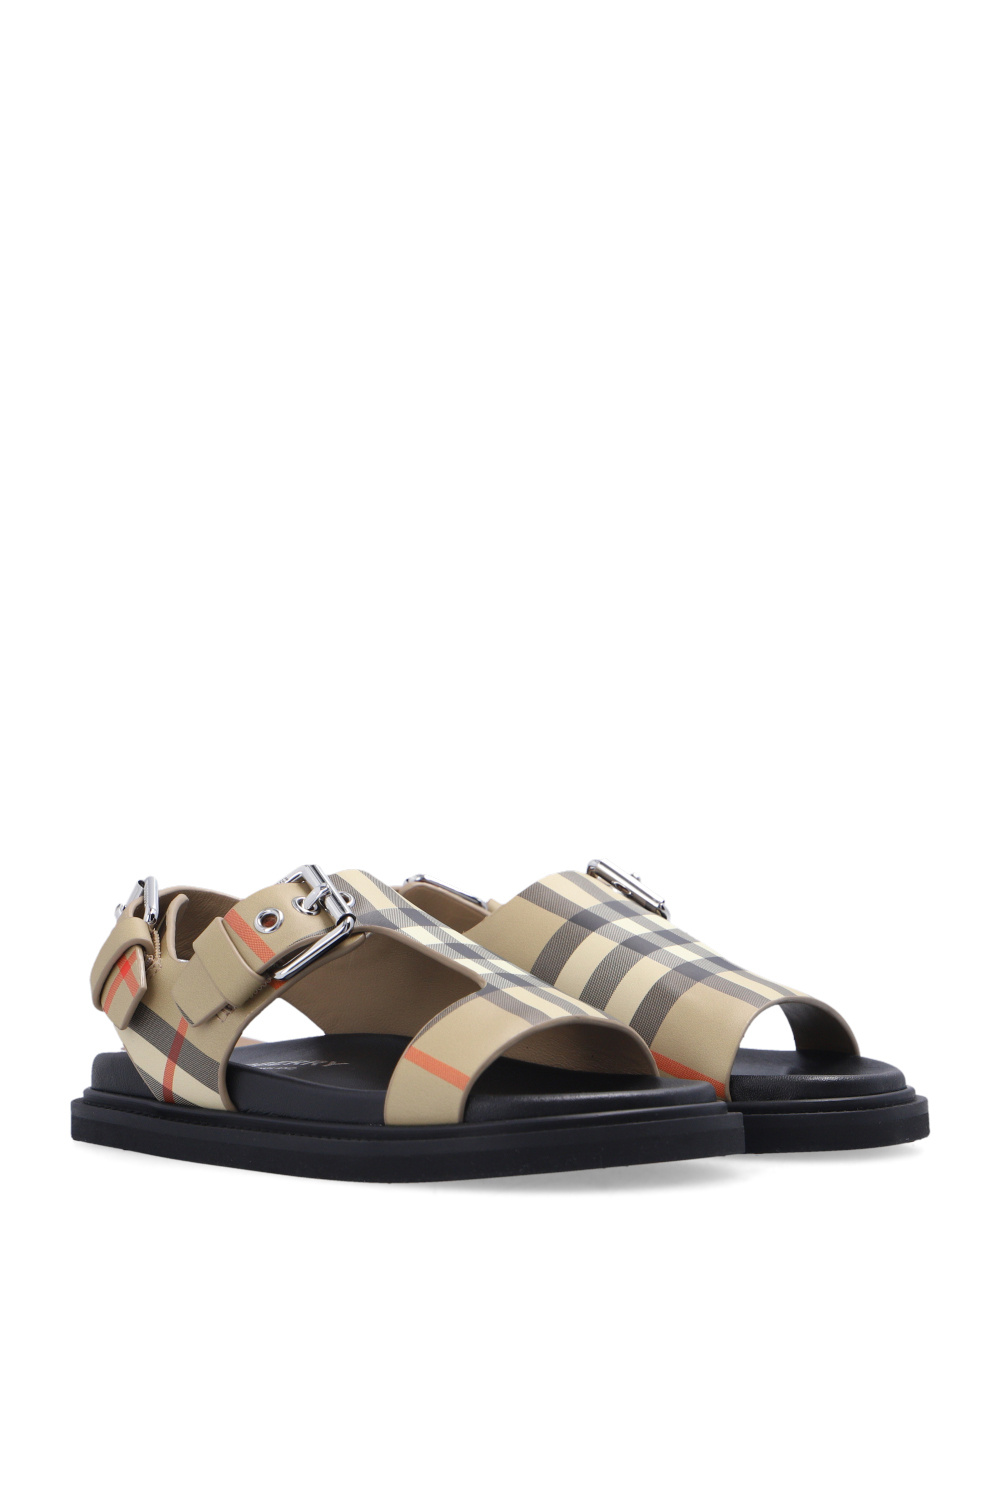 burberry pattern Kids Checked sandals